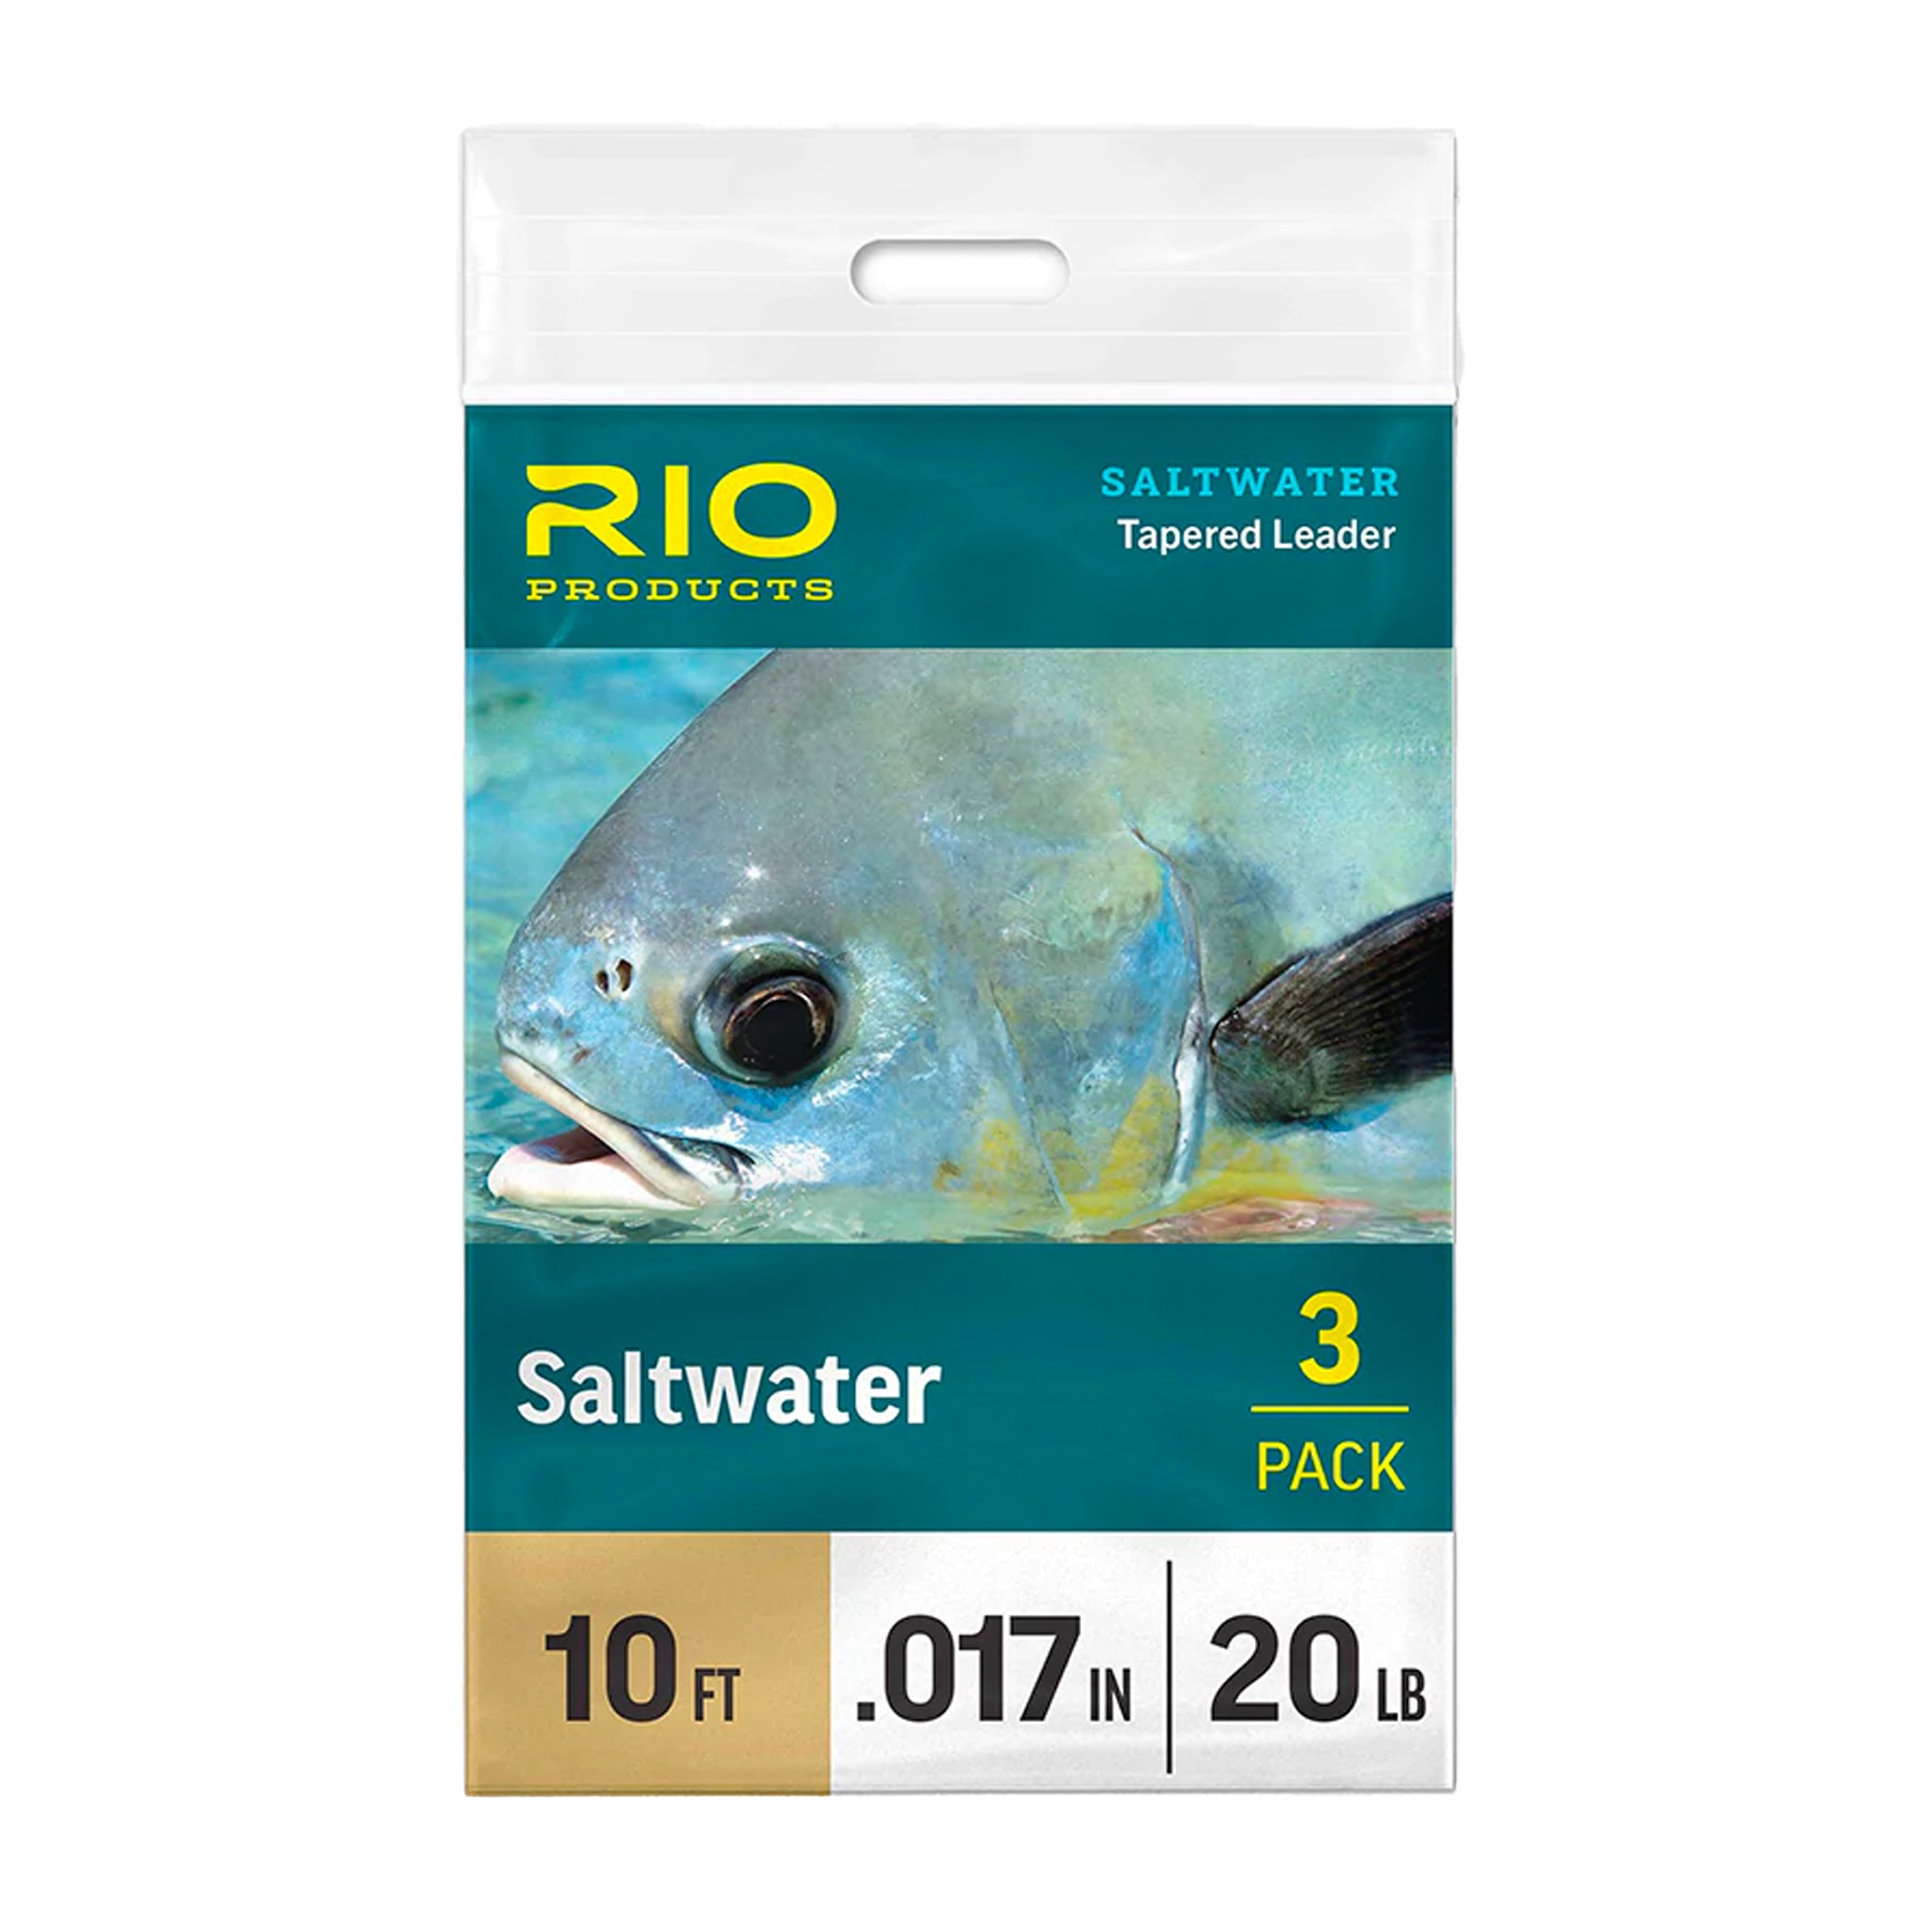 New Tippet Leaders and Lines From RIO - Fly Fishing